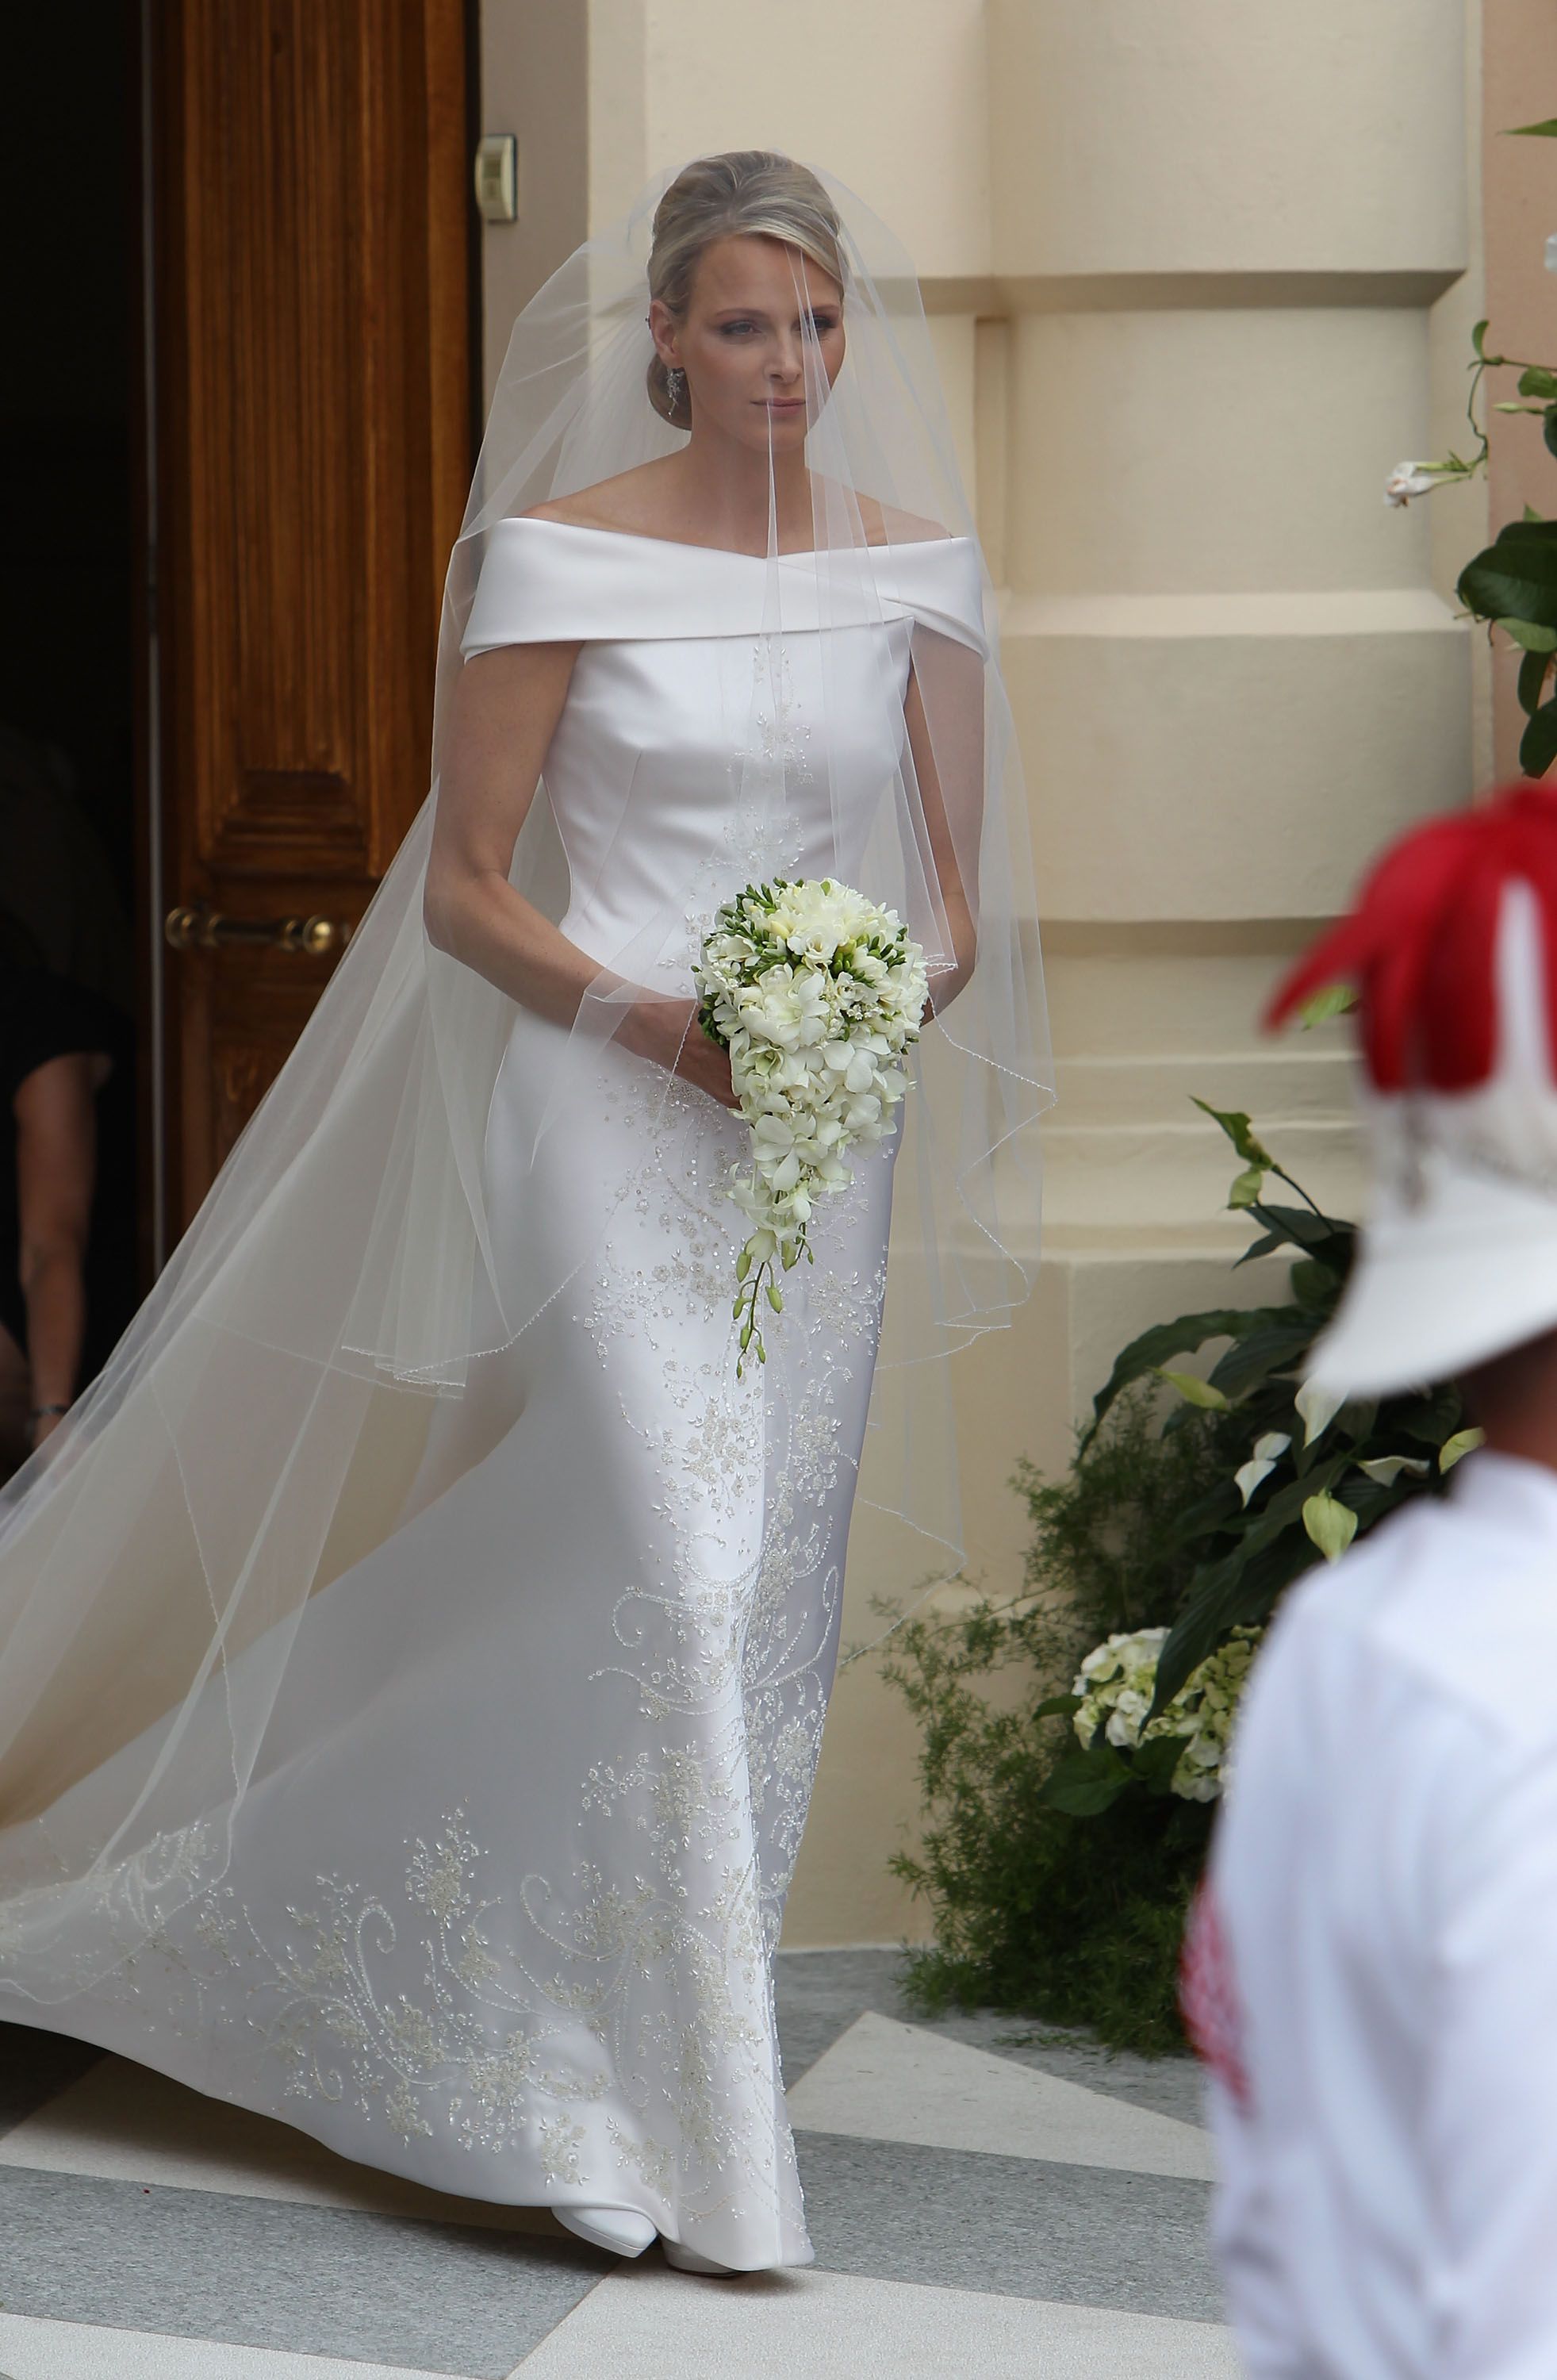 The 15 Best Royal Wedding Dresses of All Time - PureWow